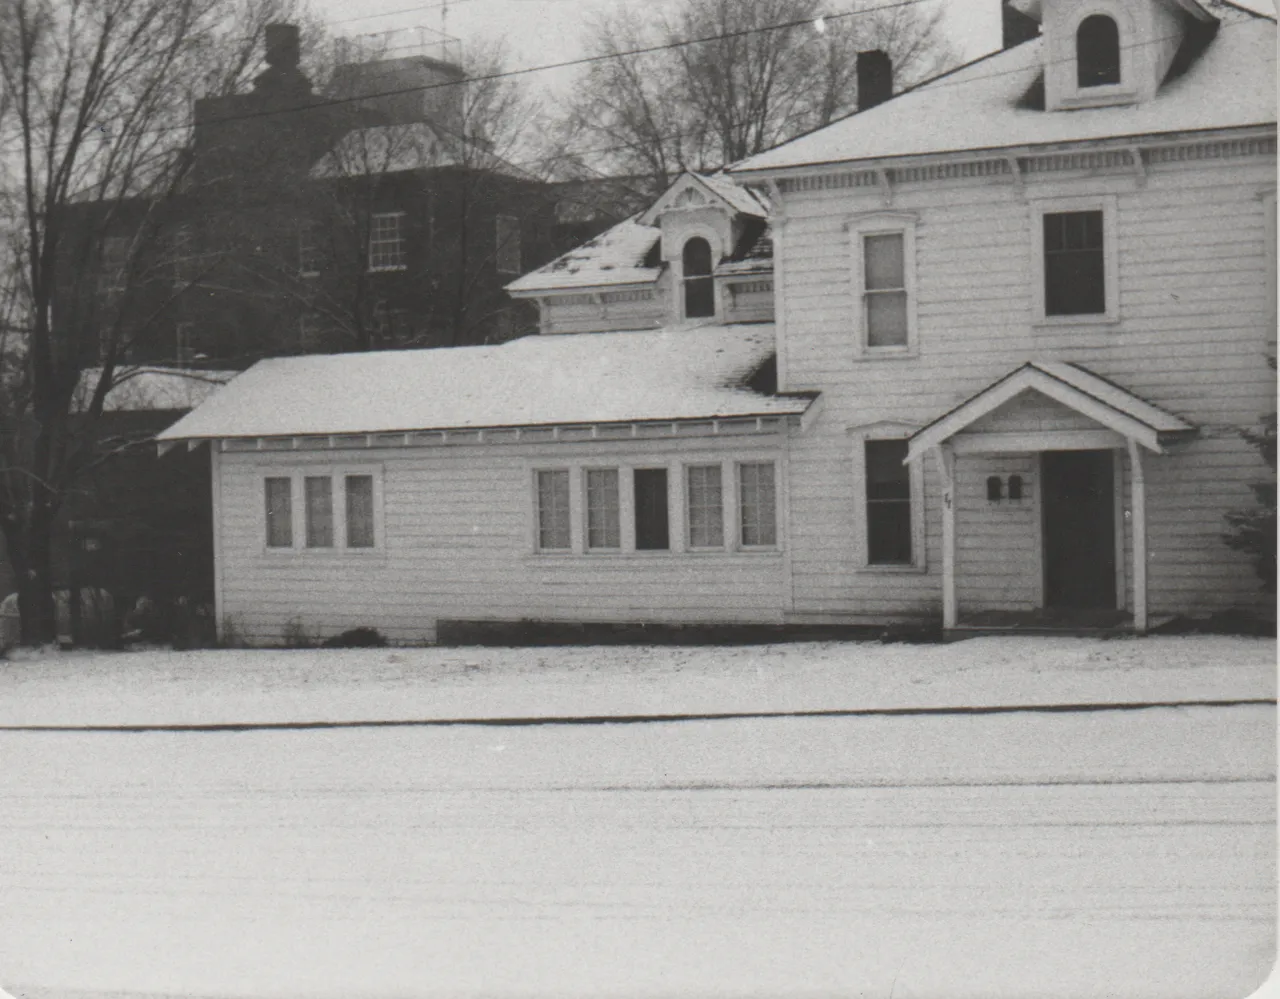 1974-12-25 - Wednesday - Snow at that white house on Christmas Day, 1pic.png